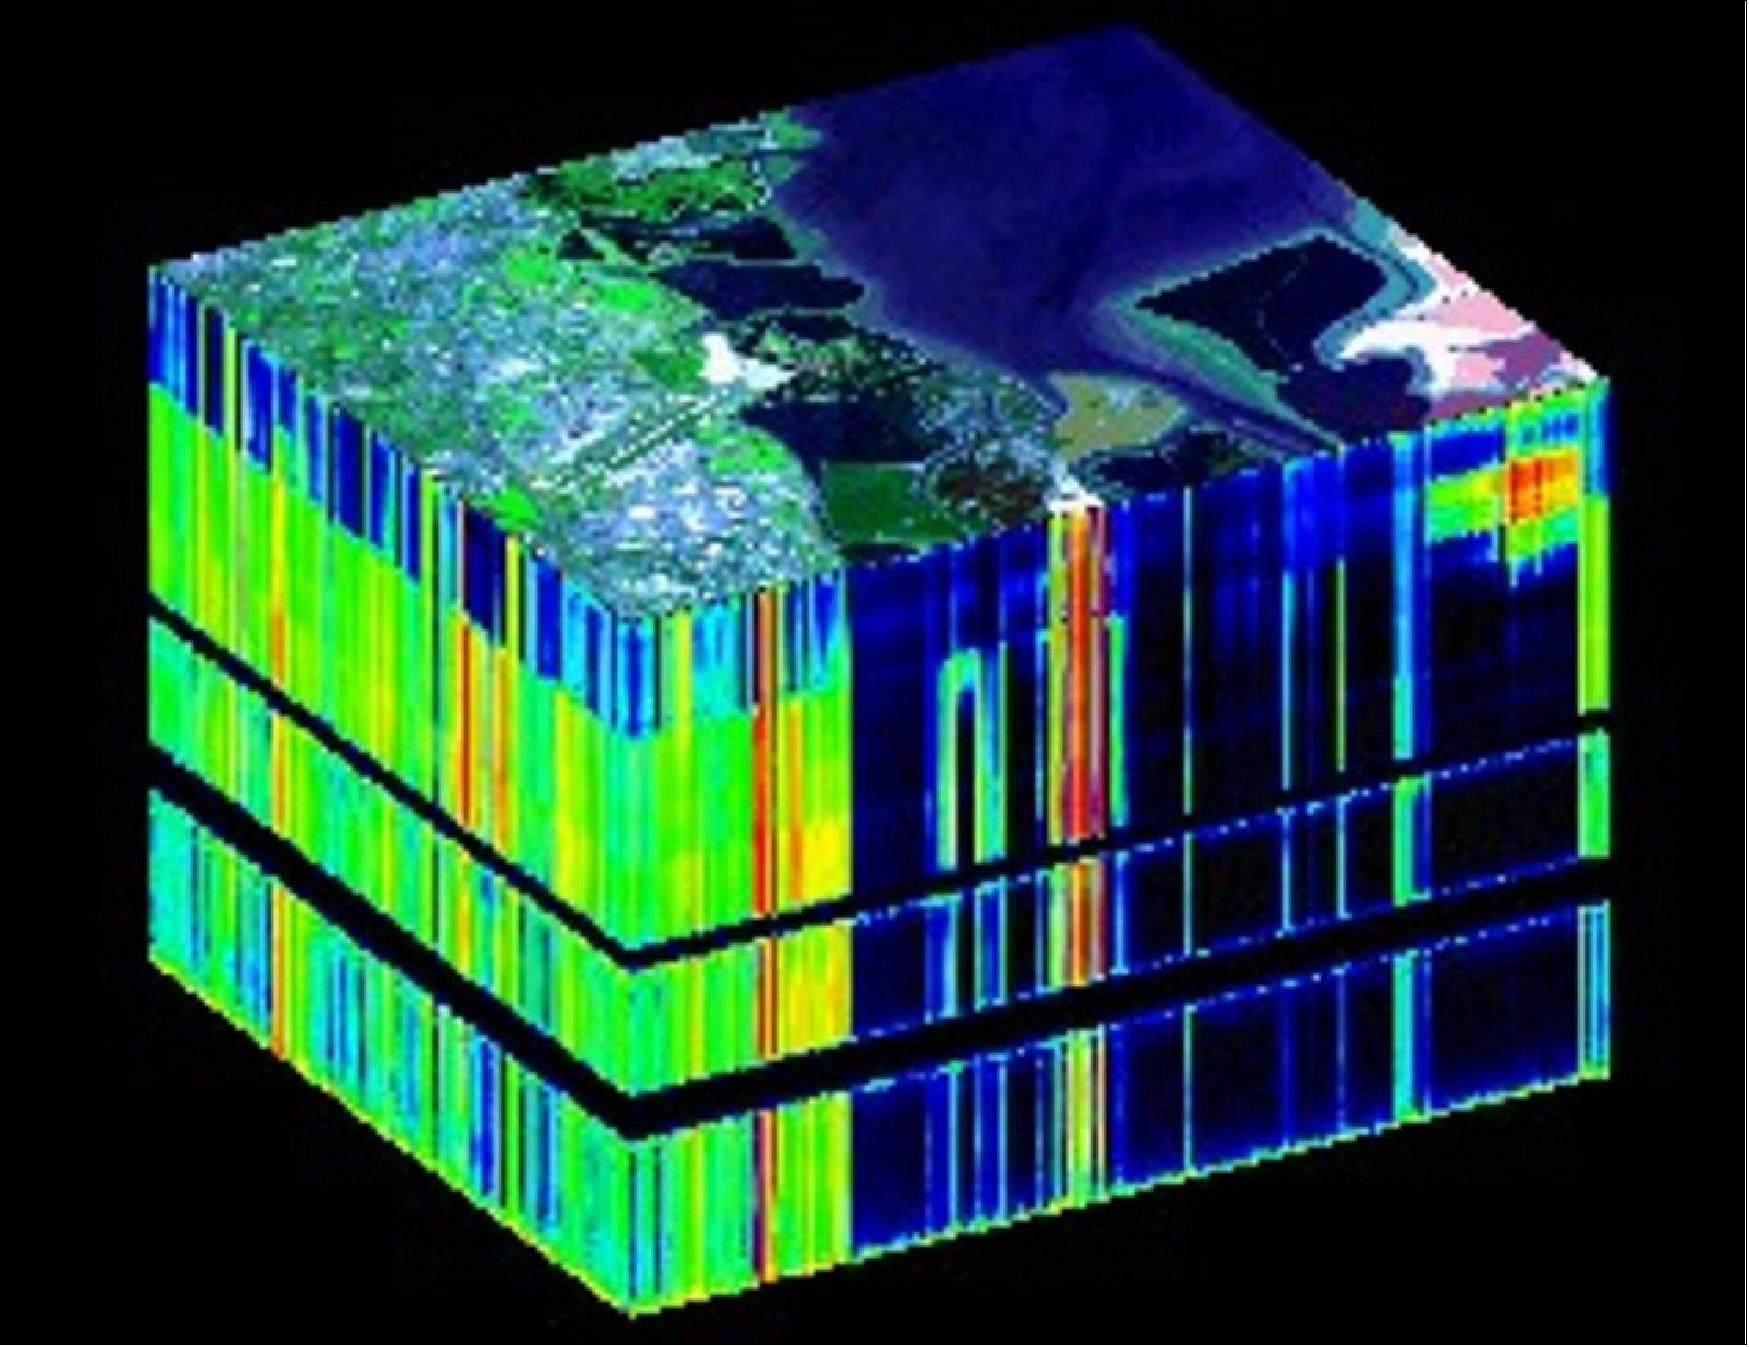 Figure 25: Illustration of a hyperspectral image 'data cube' (image credit: University of Texas at Austin, Center for Space Research)